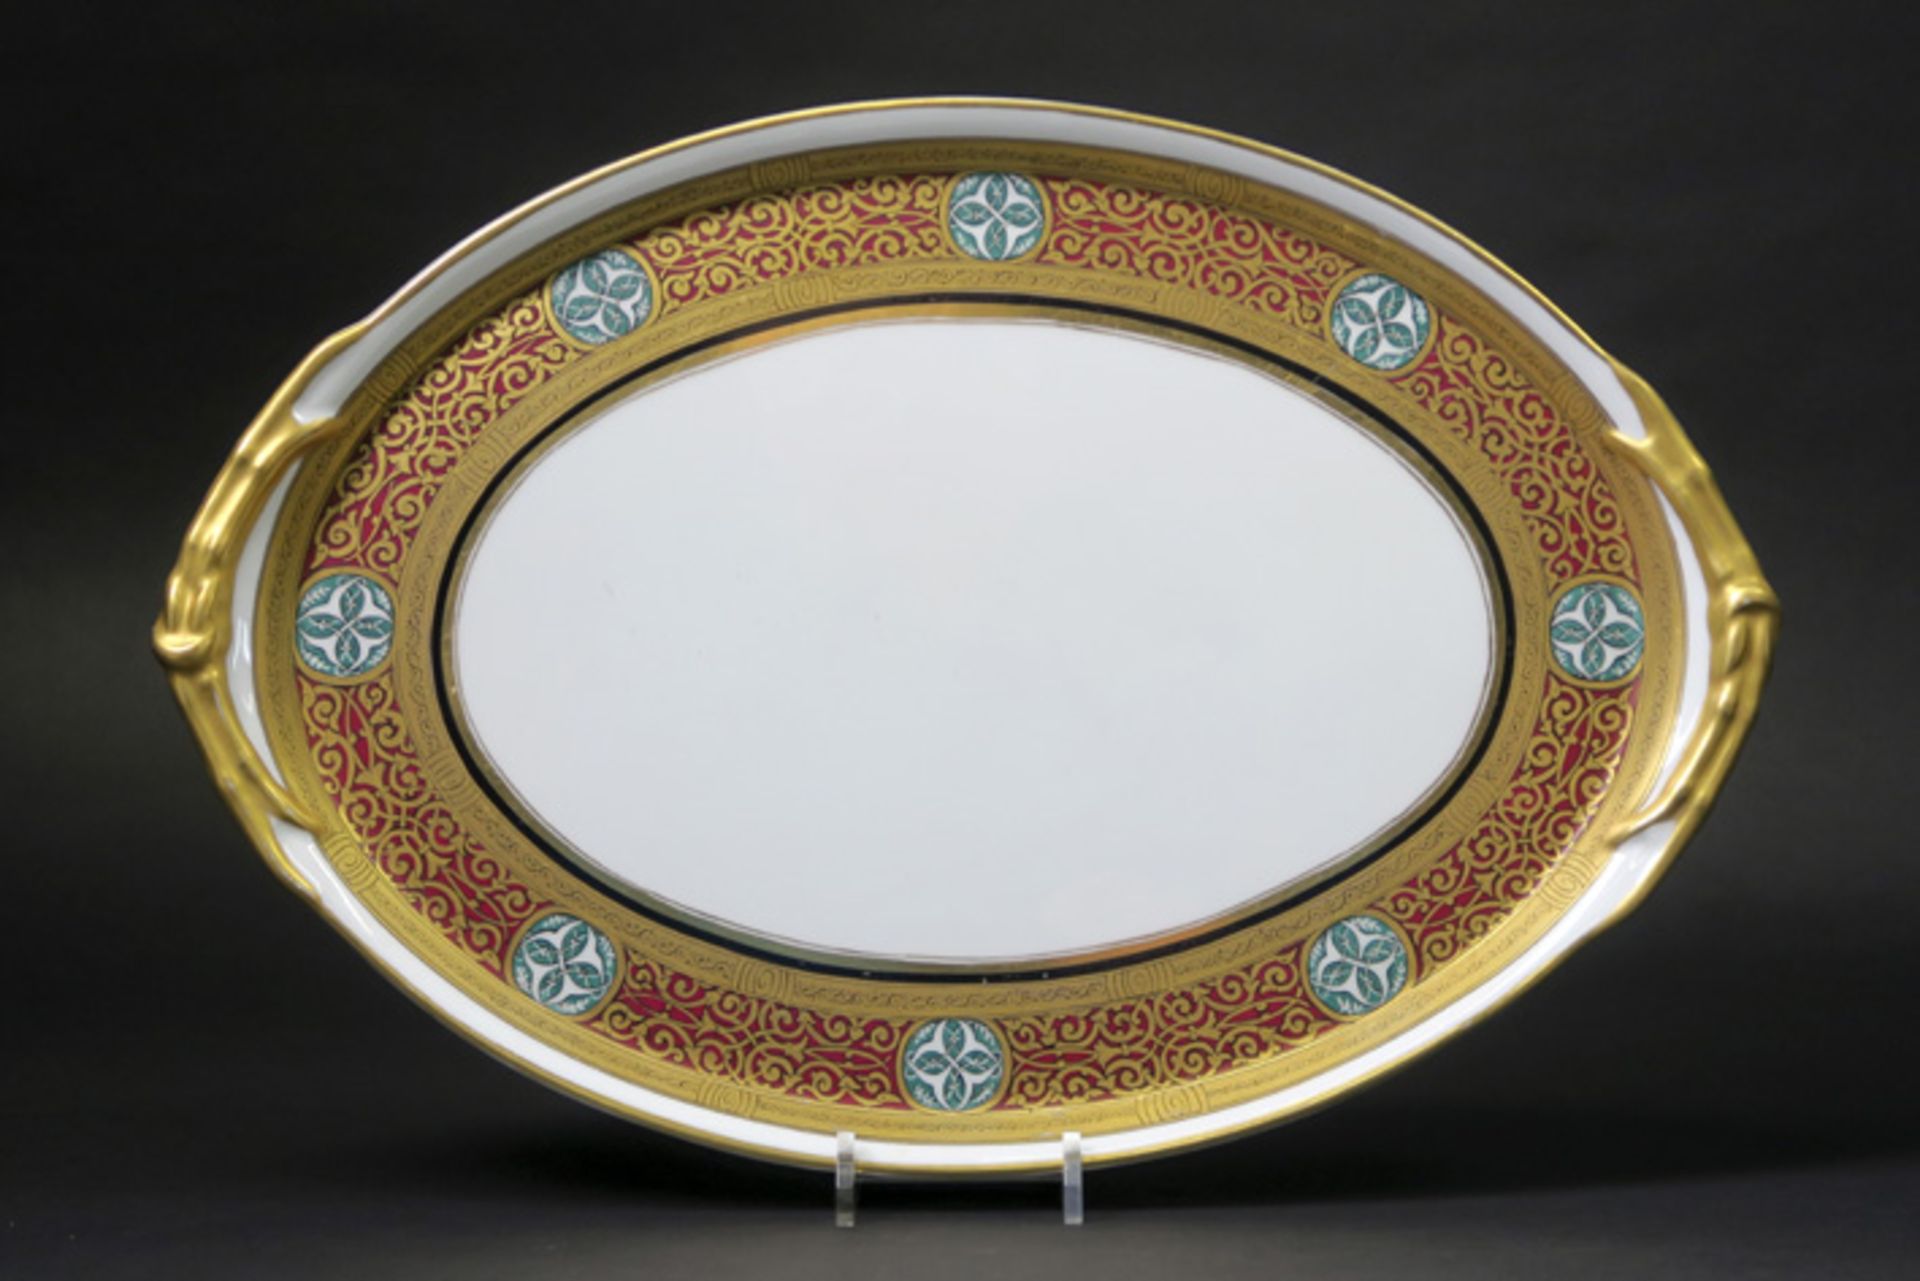 19th Cent. Russian oval dish in "Imperial Manufactury St-Peterburgh" marked porcelain from the